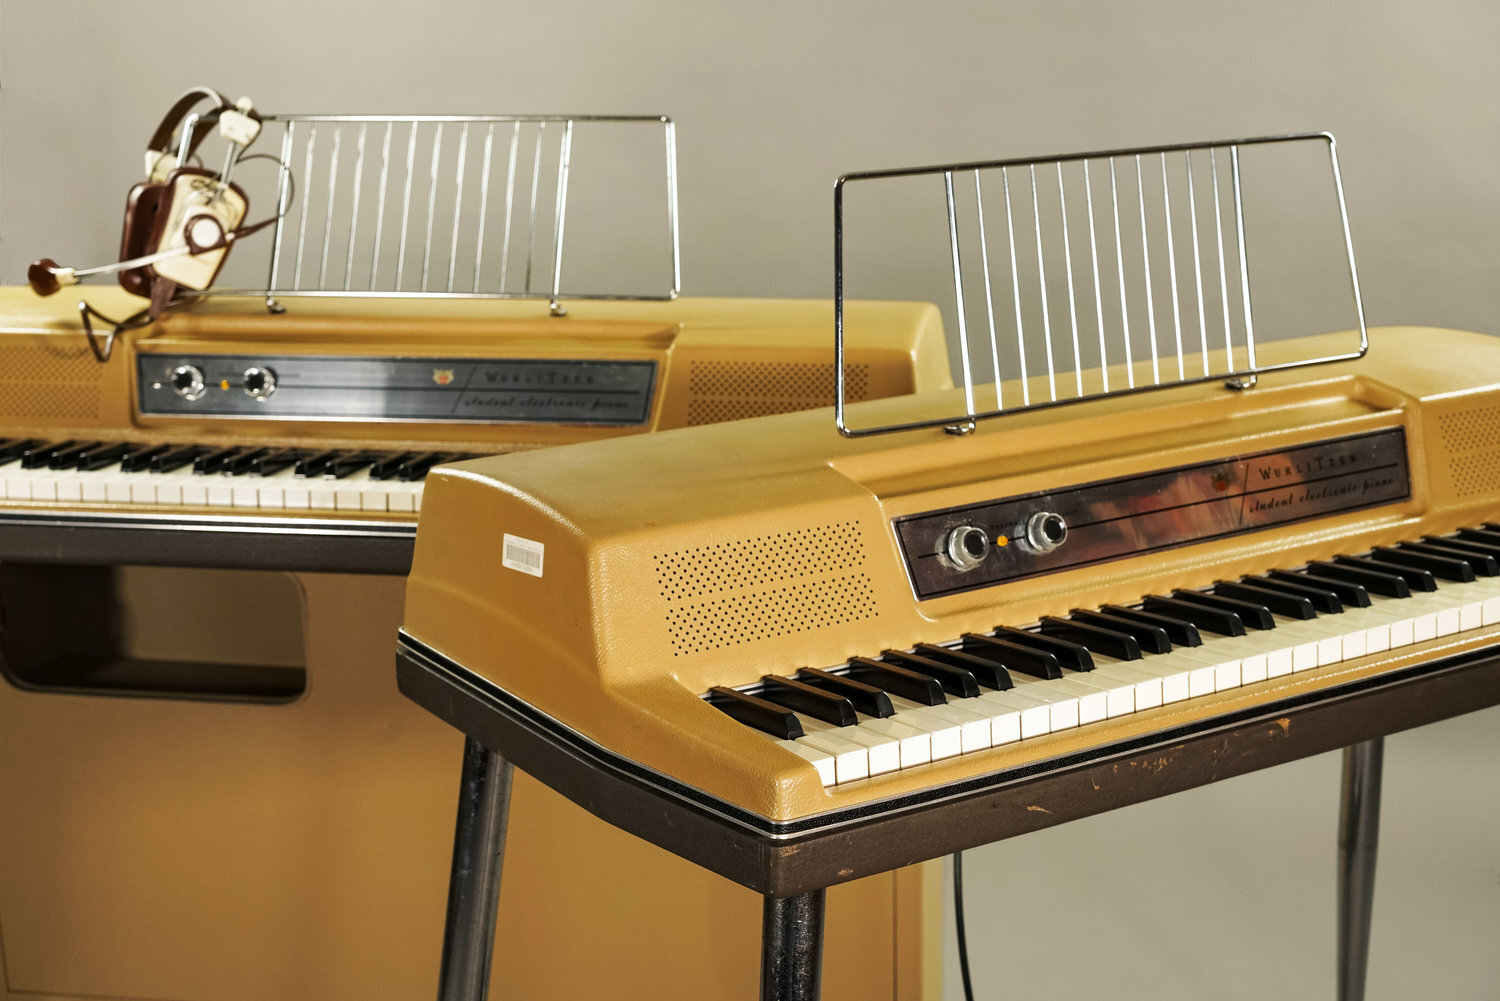 What is the difference between a Wurlitzer 200 and a 200a?